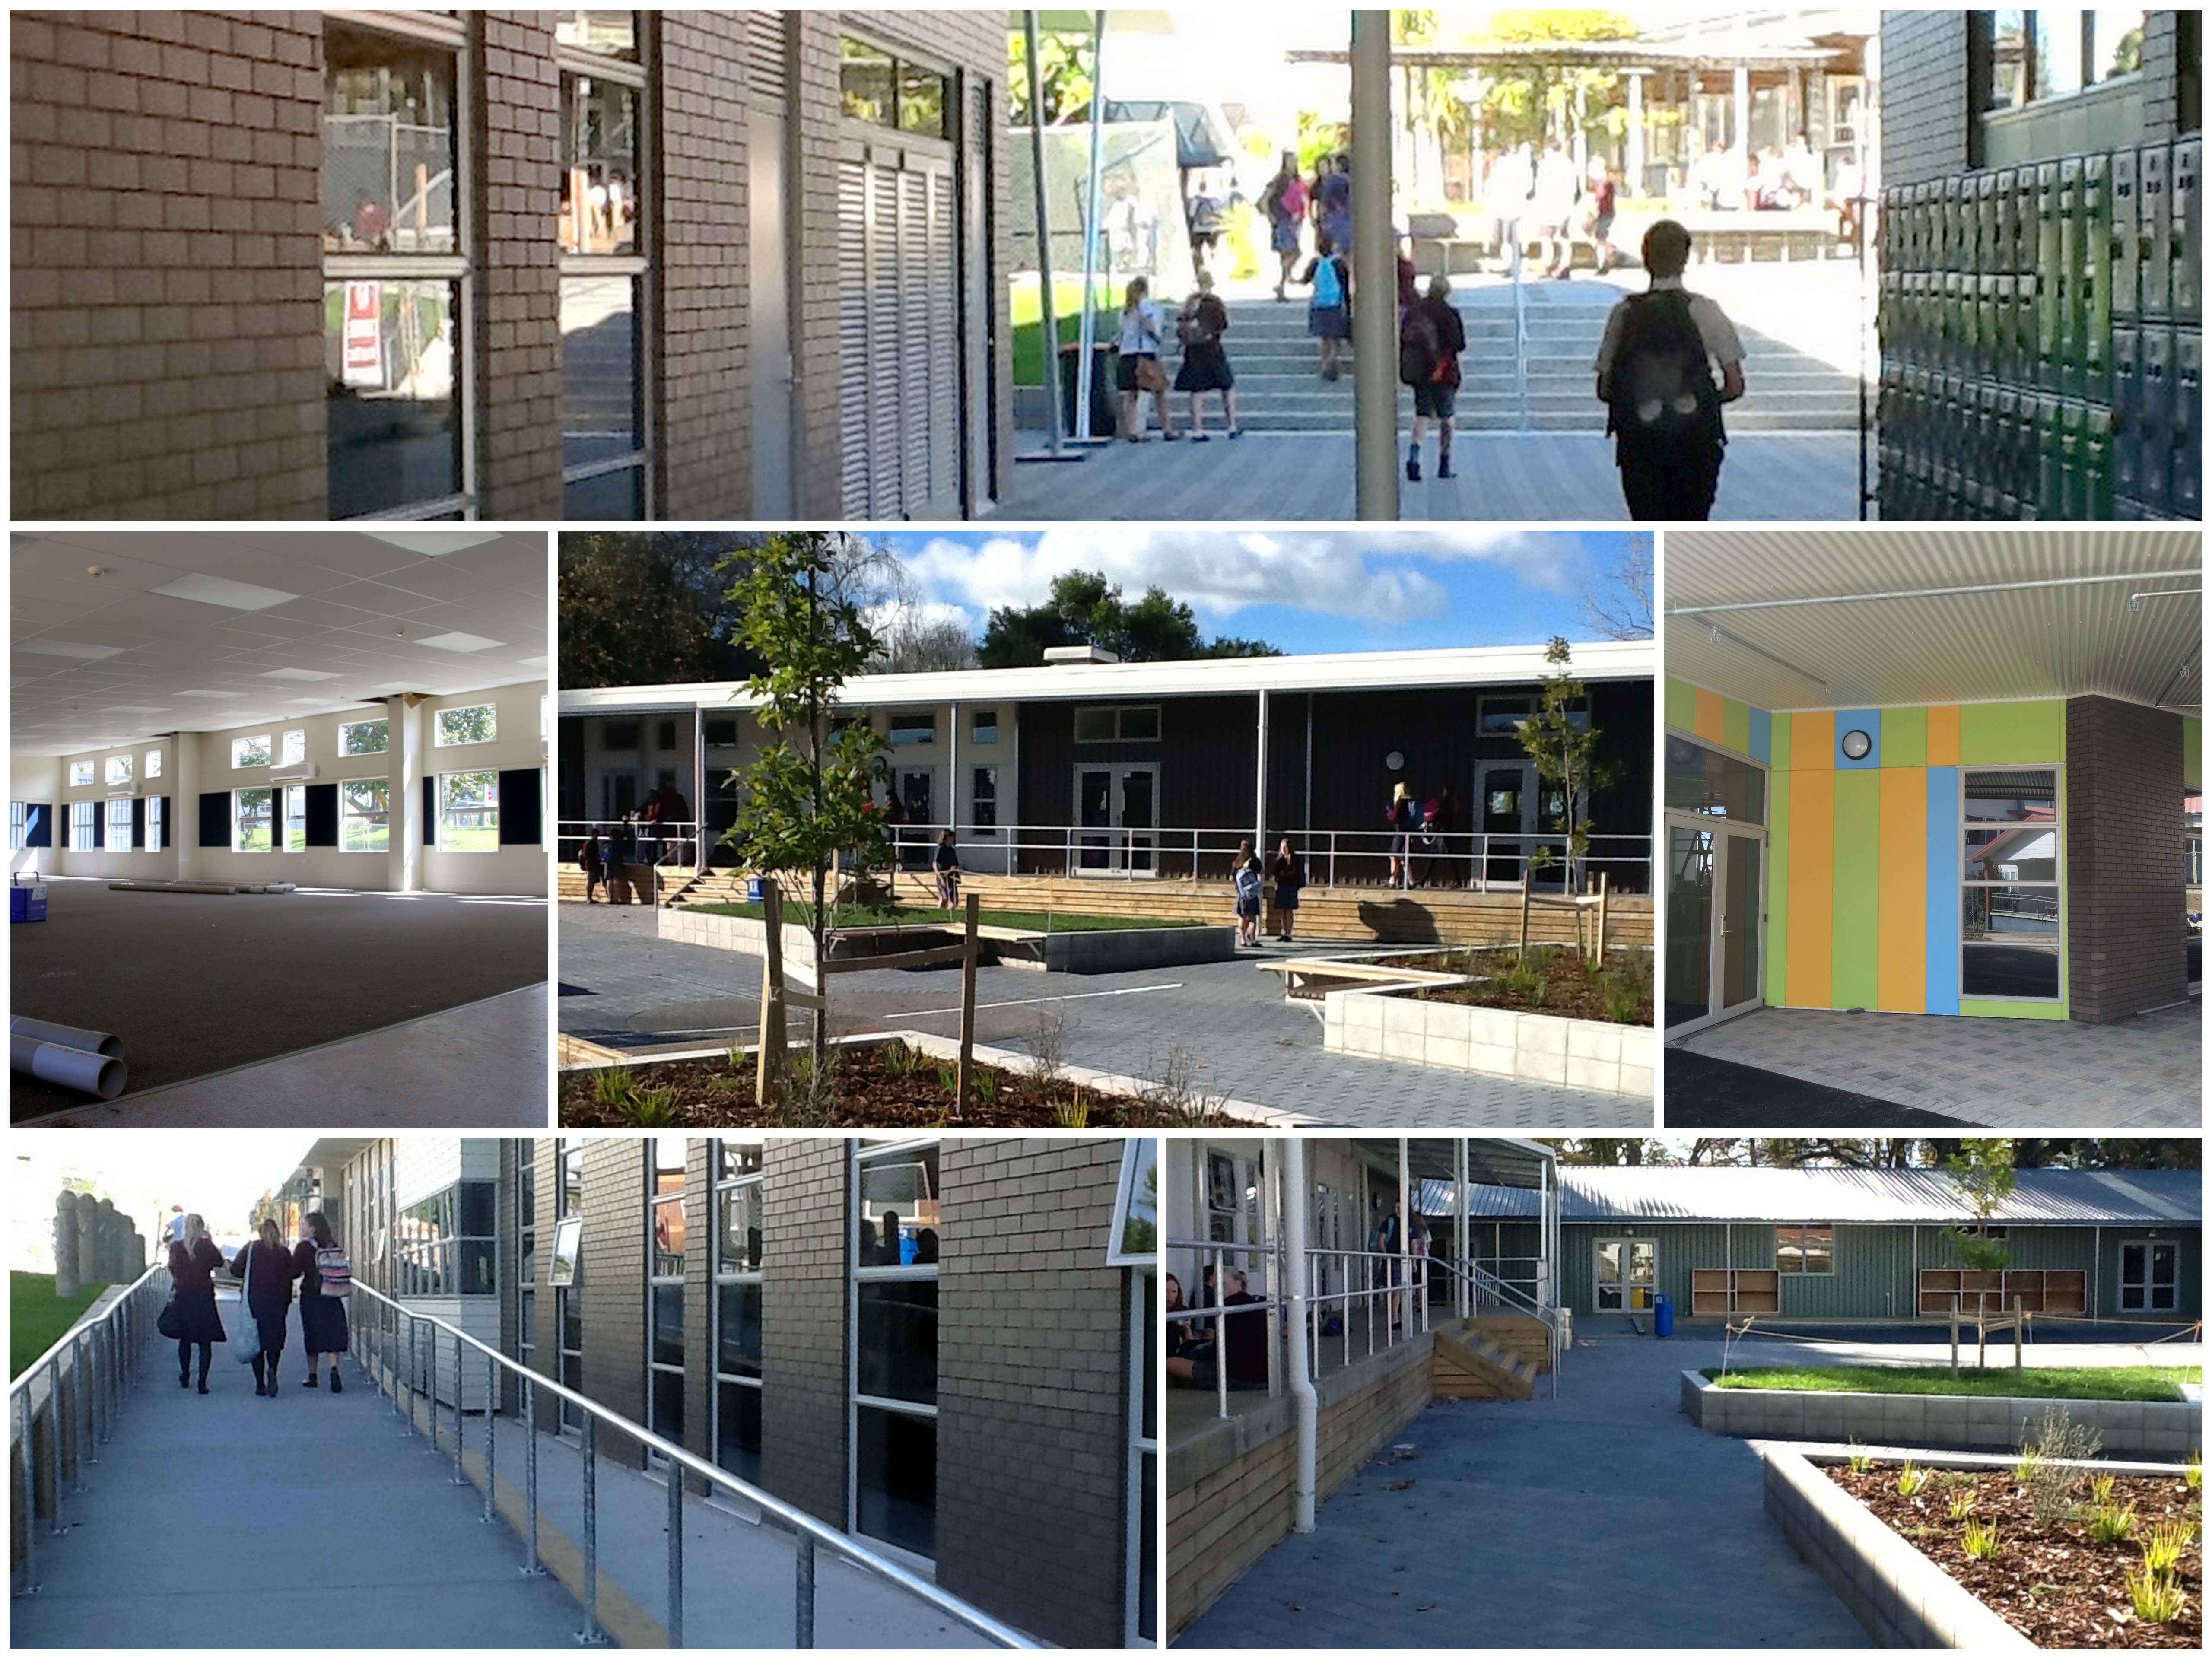 A new and open learning environment replaces a hotch potch of dilapidated buildings.